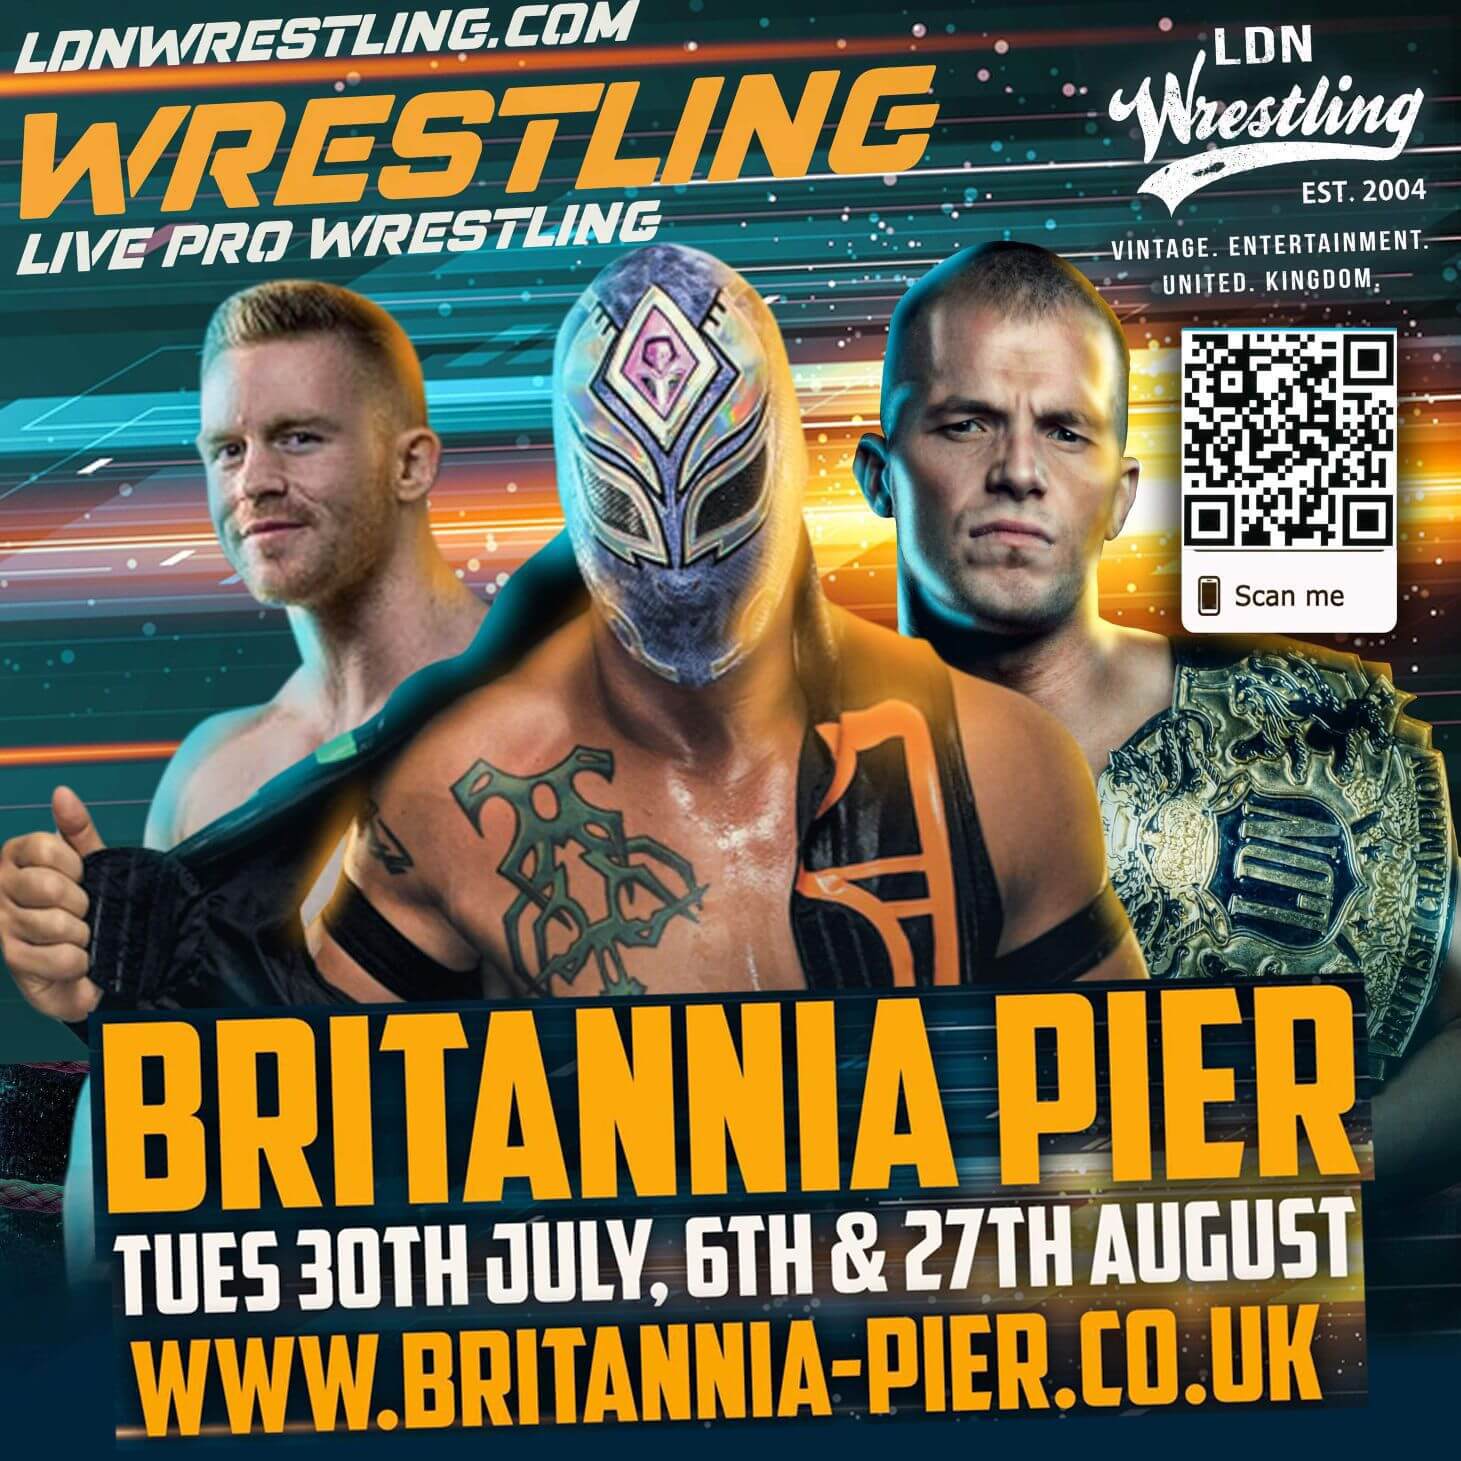 Live Pro Wrestling at the Pier